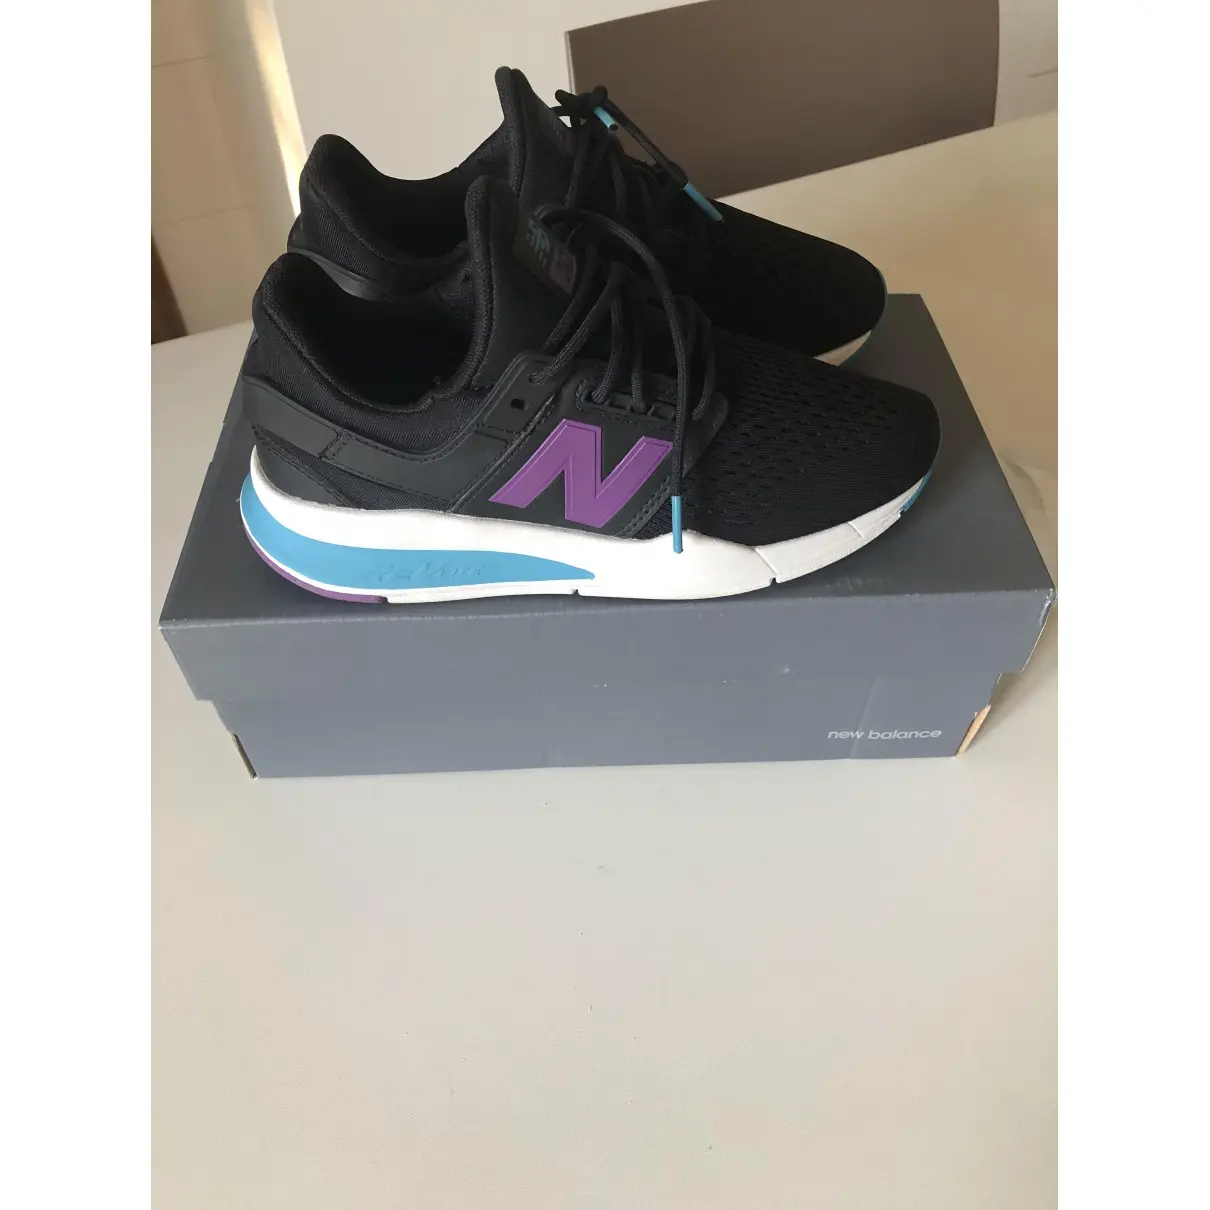 New Balance Trainers for sale